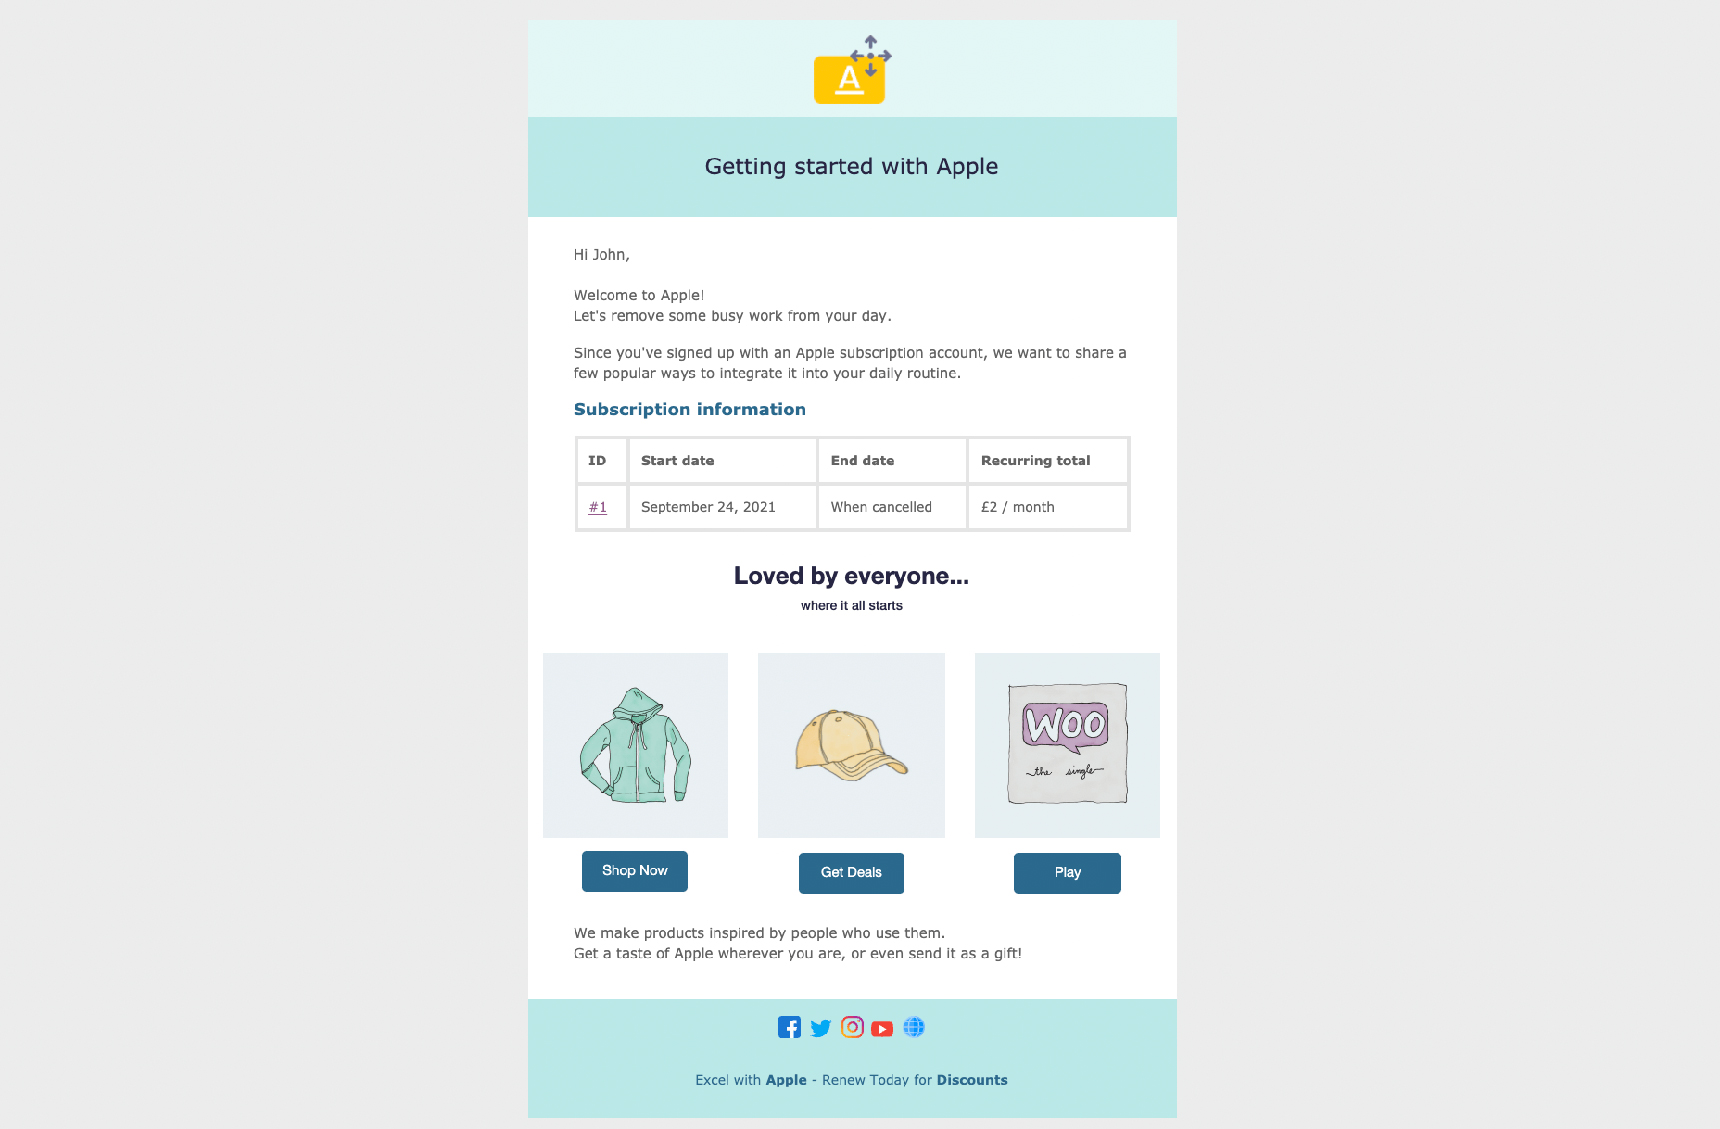 WooCommerce subscription email templates